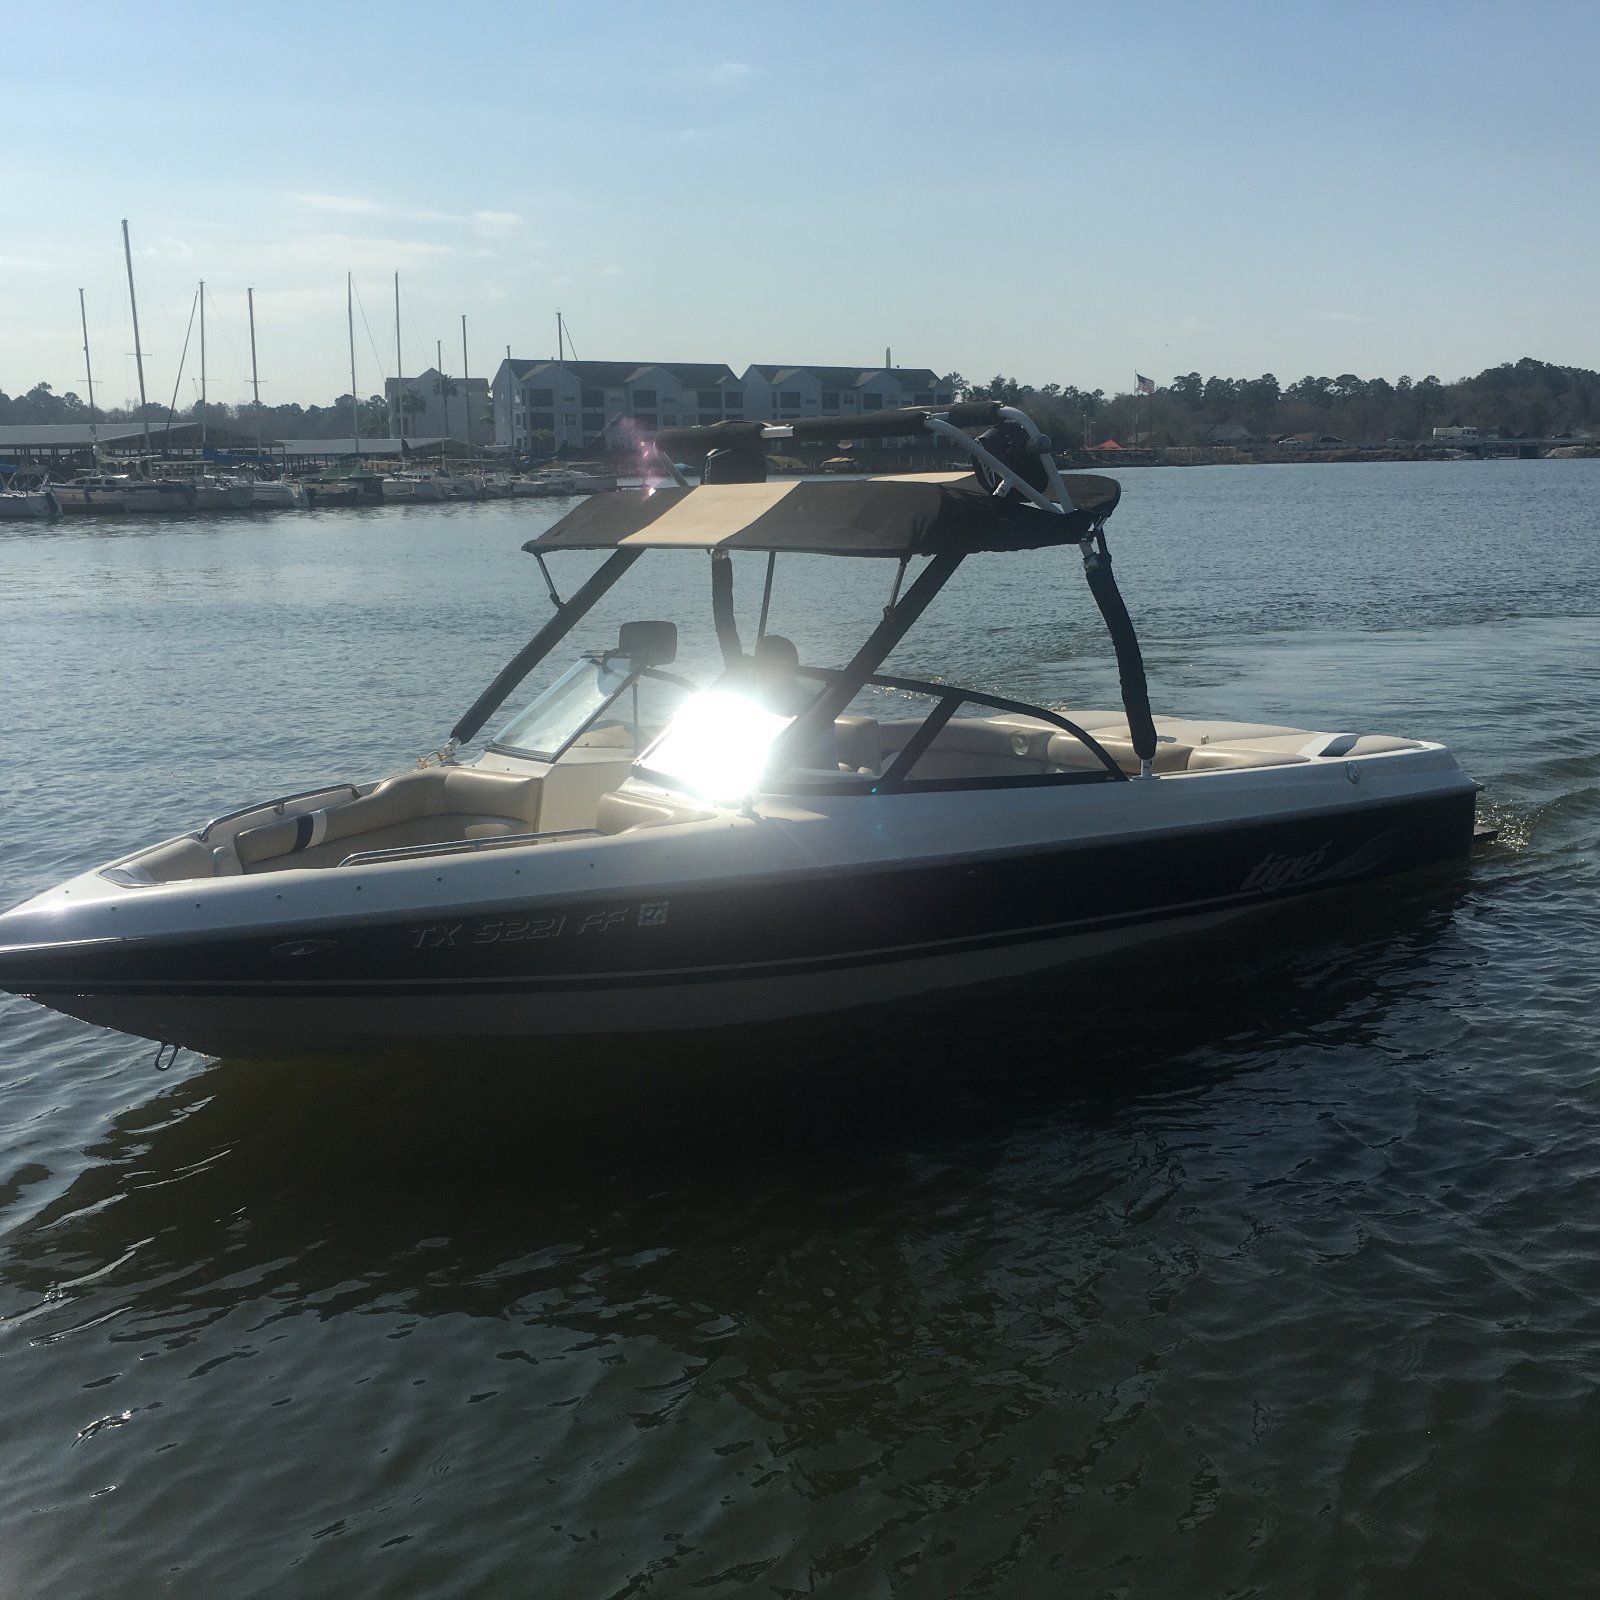 Tige 1999 for sale for $9,000 - Boats-from-USA.com